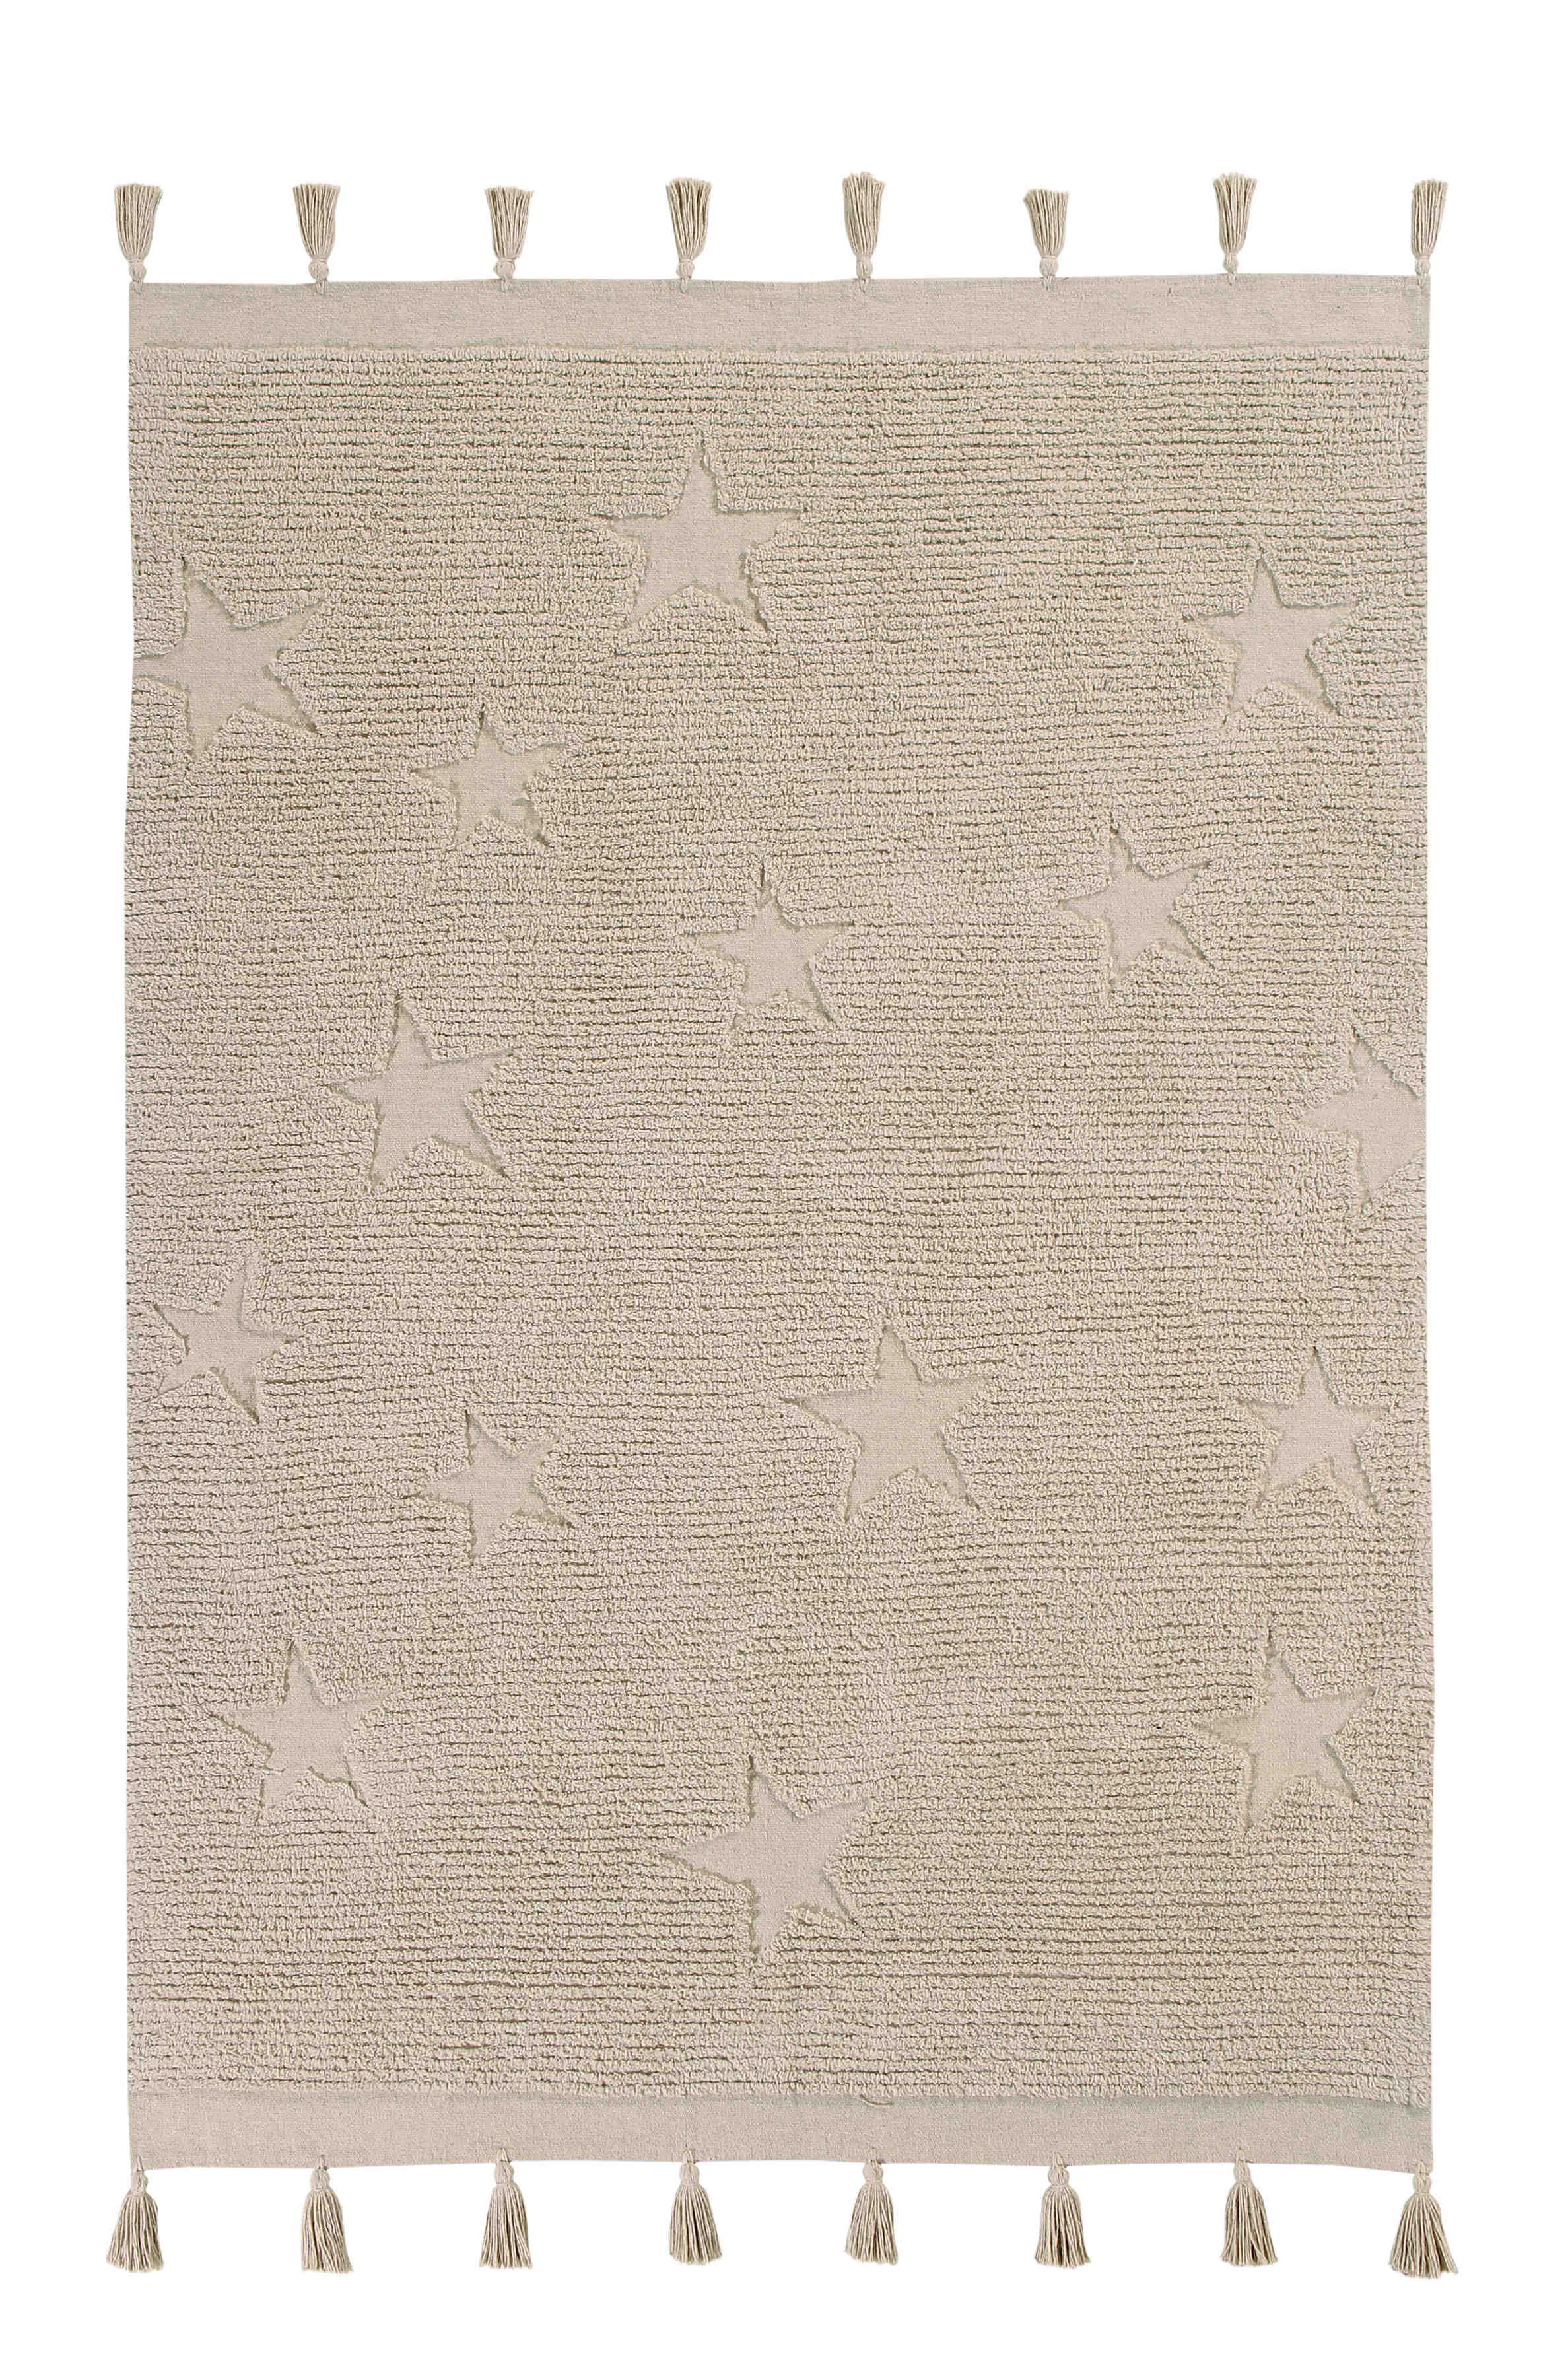 Rectangular natural cotton rug decorated with exposed stars and a tassel border.